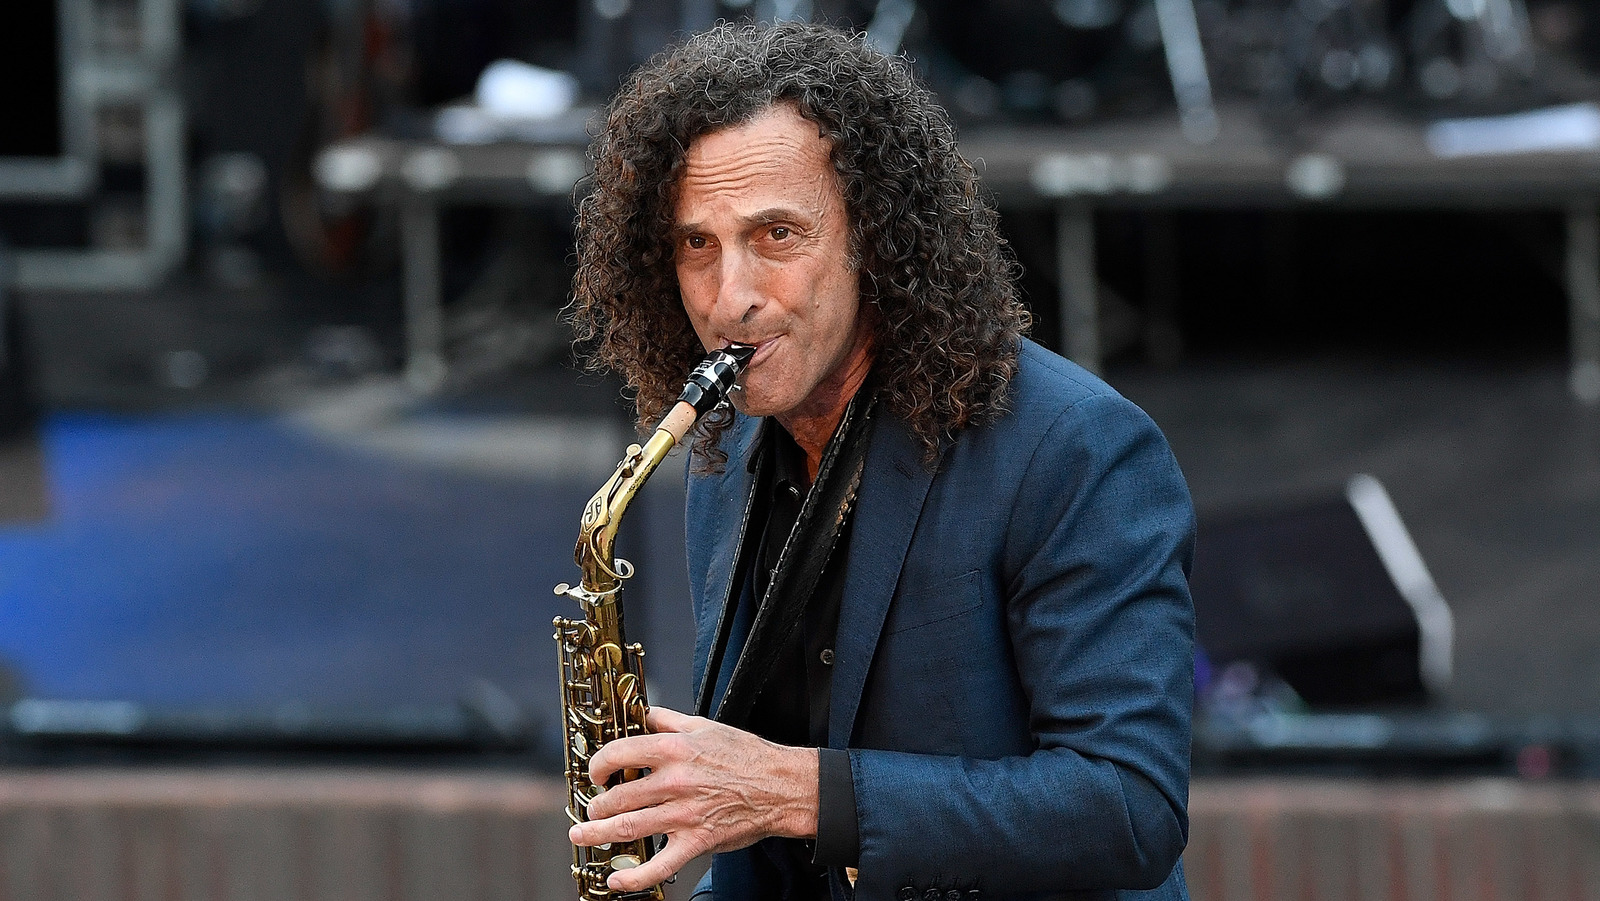 What instrument does Kenny G play? Sound and Silence